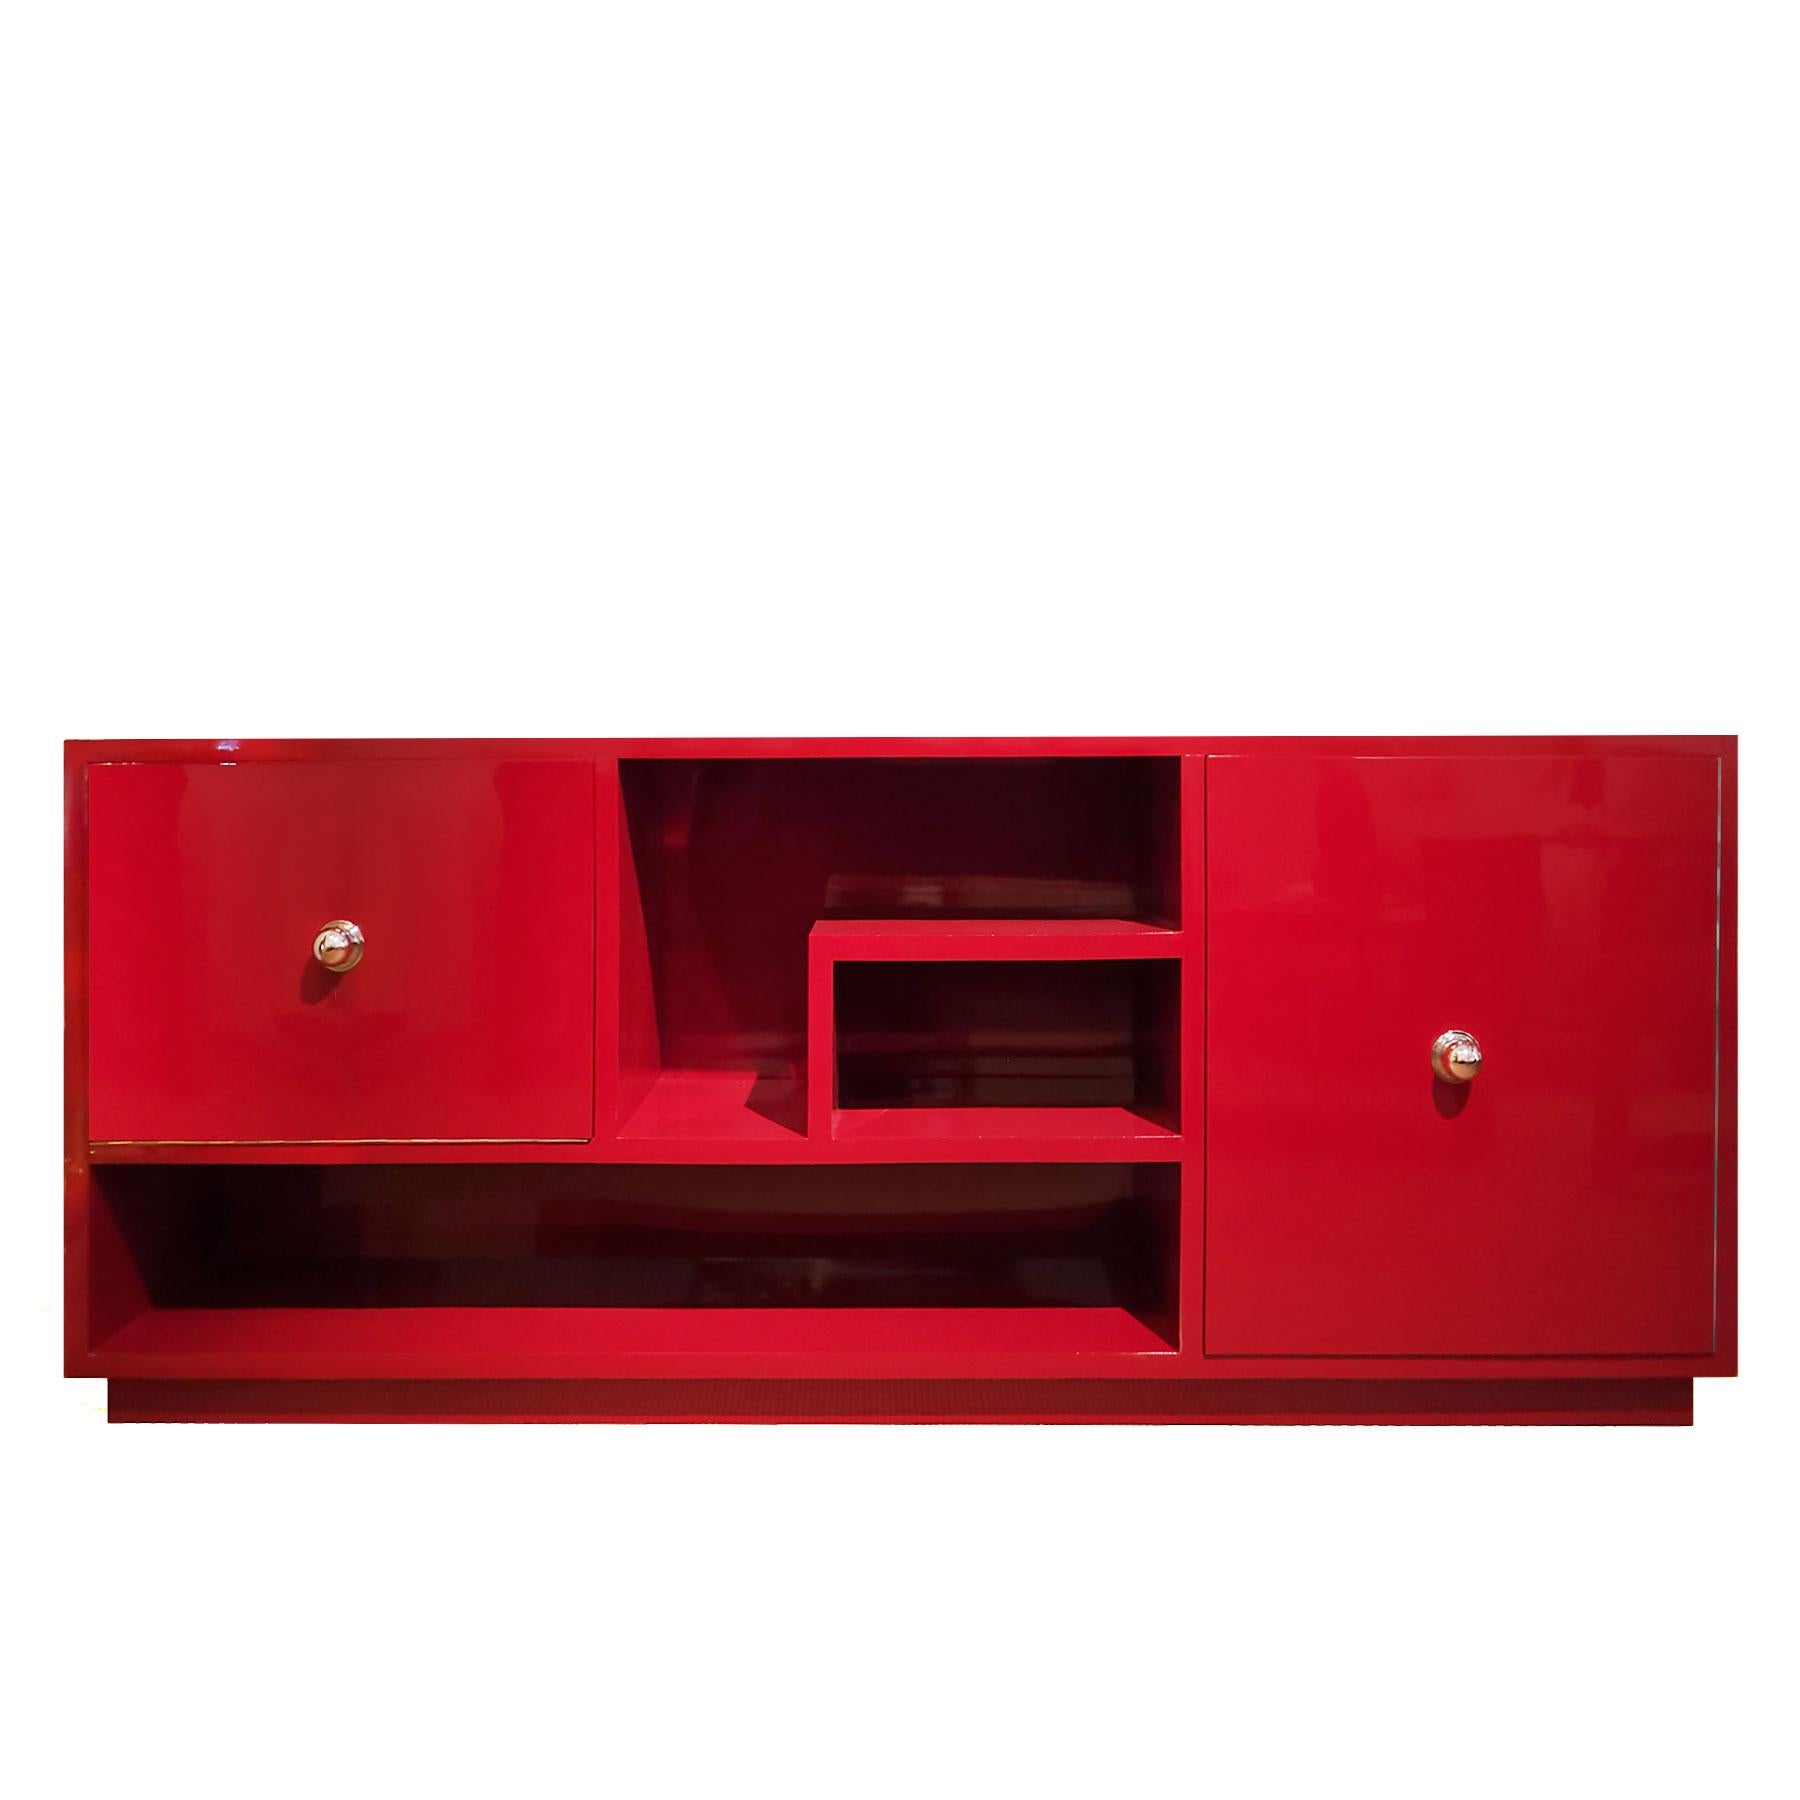 Low cubist sideboard, Chinese red lacquered wood, one flap door with bar inside, light on the left side. One door with two shelves. Mahogany veneer inside. Chrome plated brass handles.

Design: GATCPAC Mouvement.

Spain, Barcelona circa 1930.